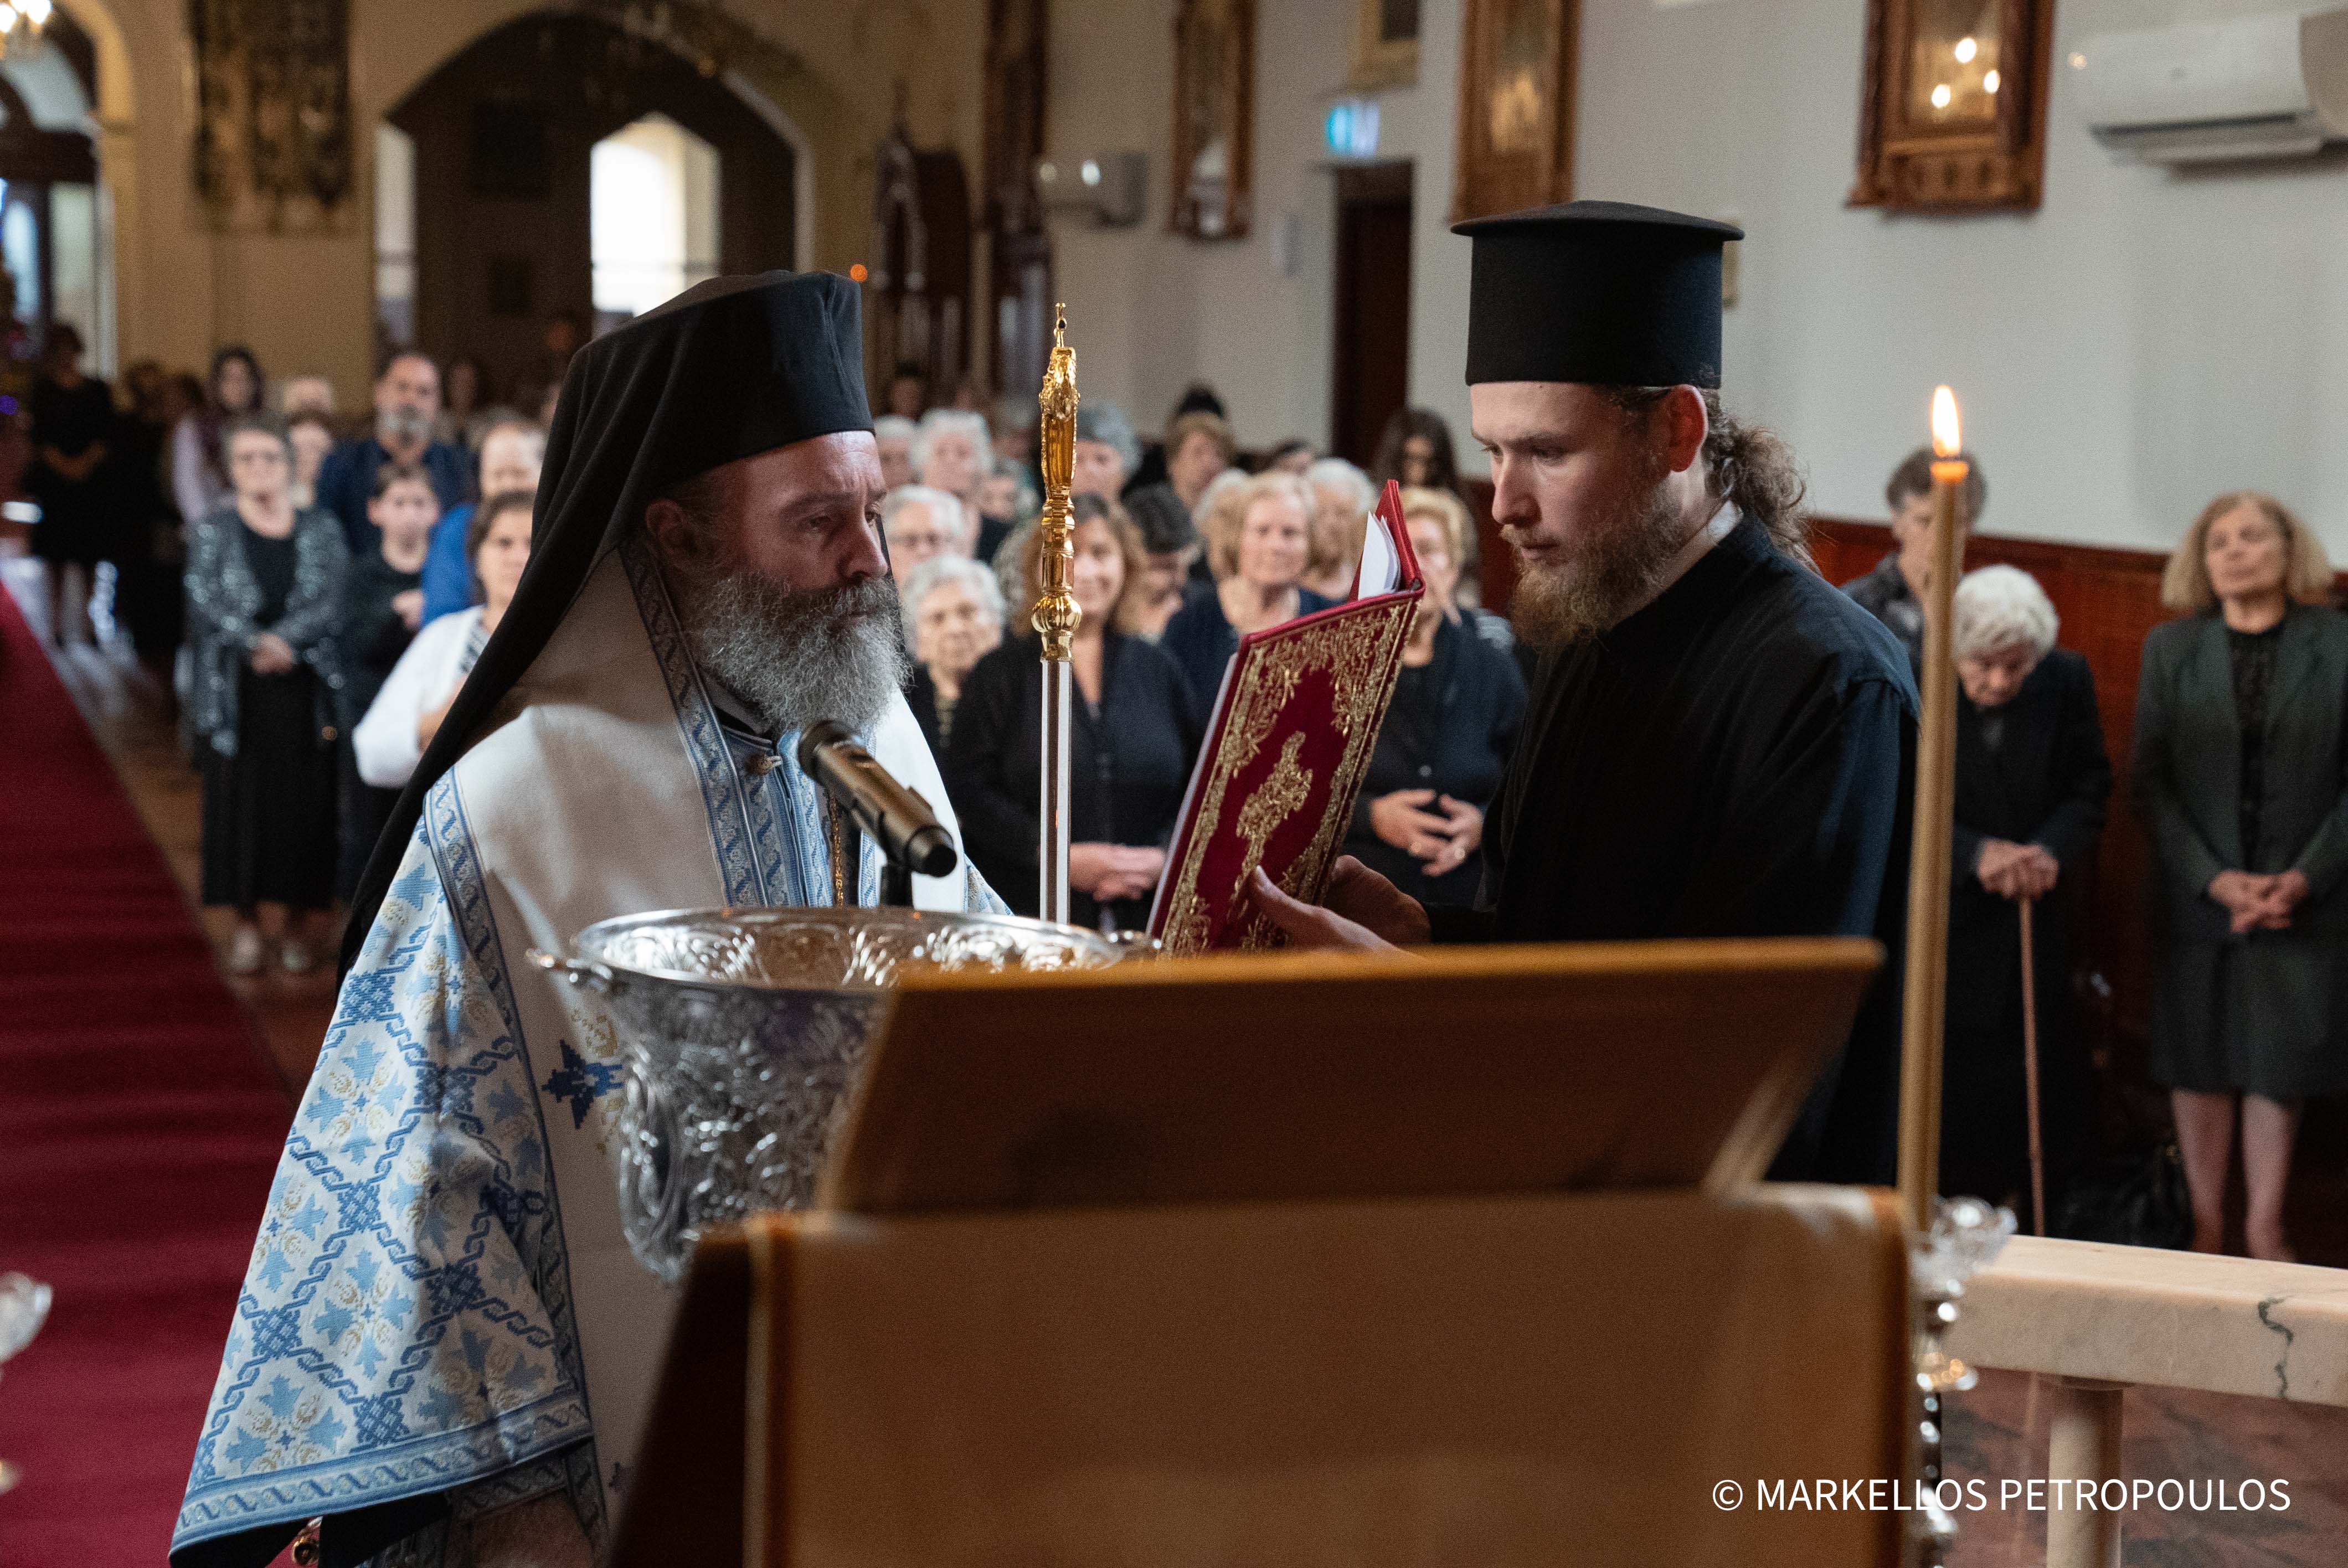 The Eve of the Feast of the Epiphany at the Holy Monastery of ‘Axion Esti’ in Northcote